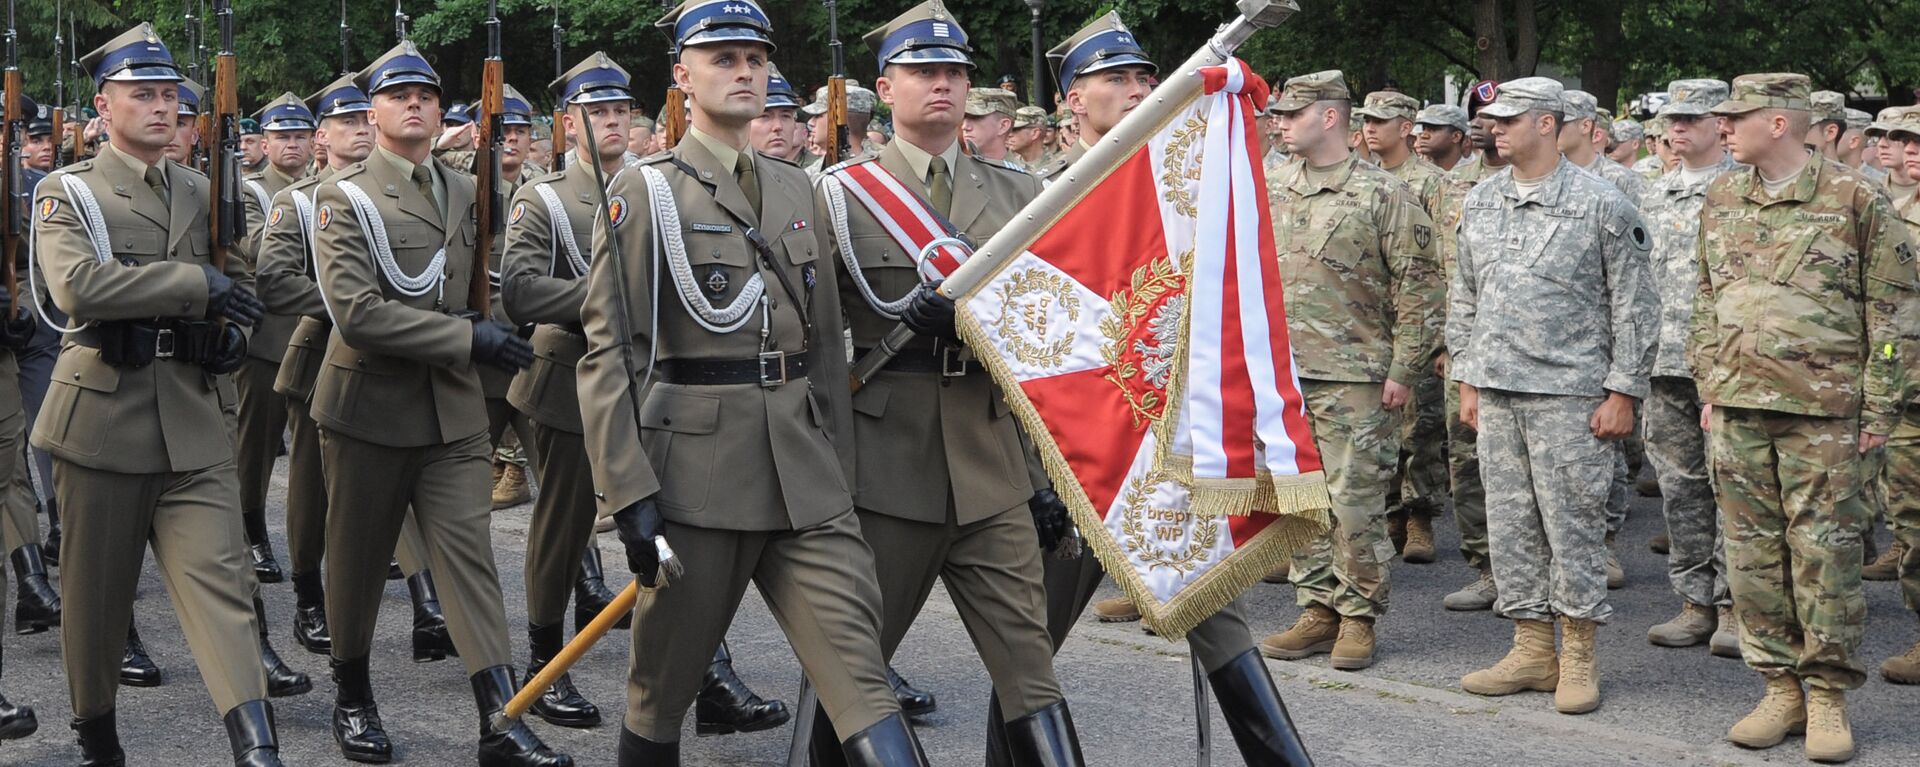 Polish honour guard march during the opening ceremony of the the Anaconda-16 military exercise in Rembertow, June 6, 2016 - Sputnik International, 1920, 10.05.2023